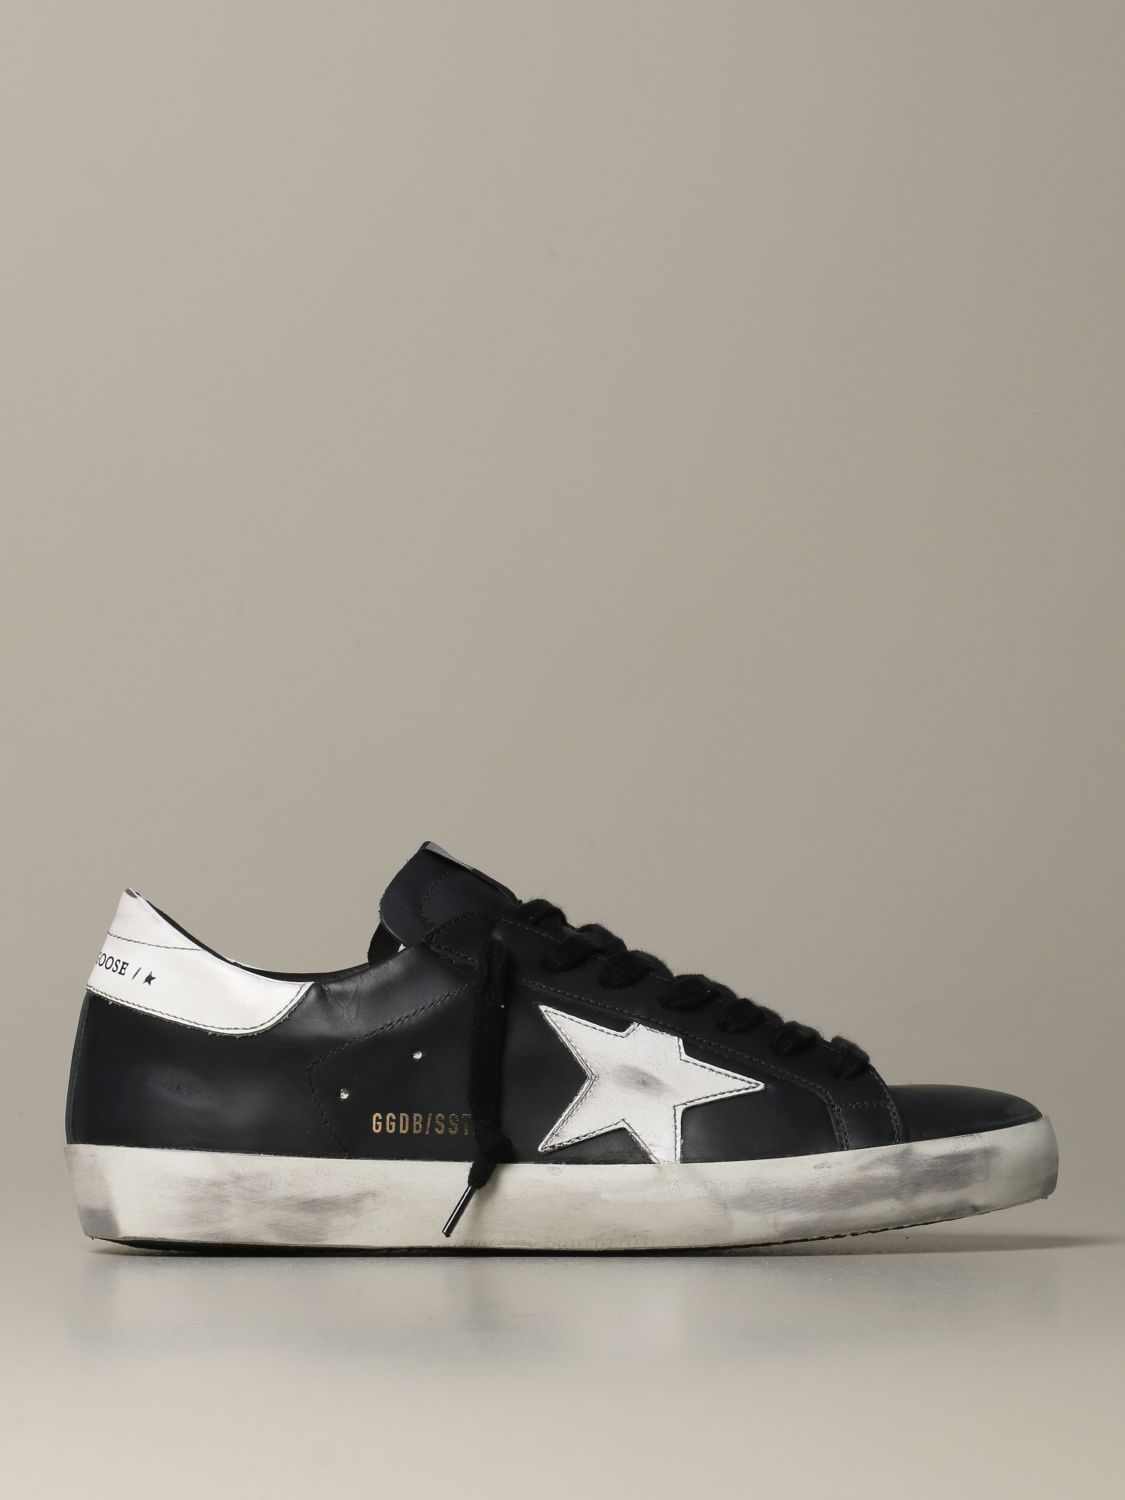 golden goose superstar g68 leather trainers